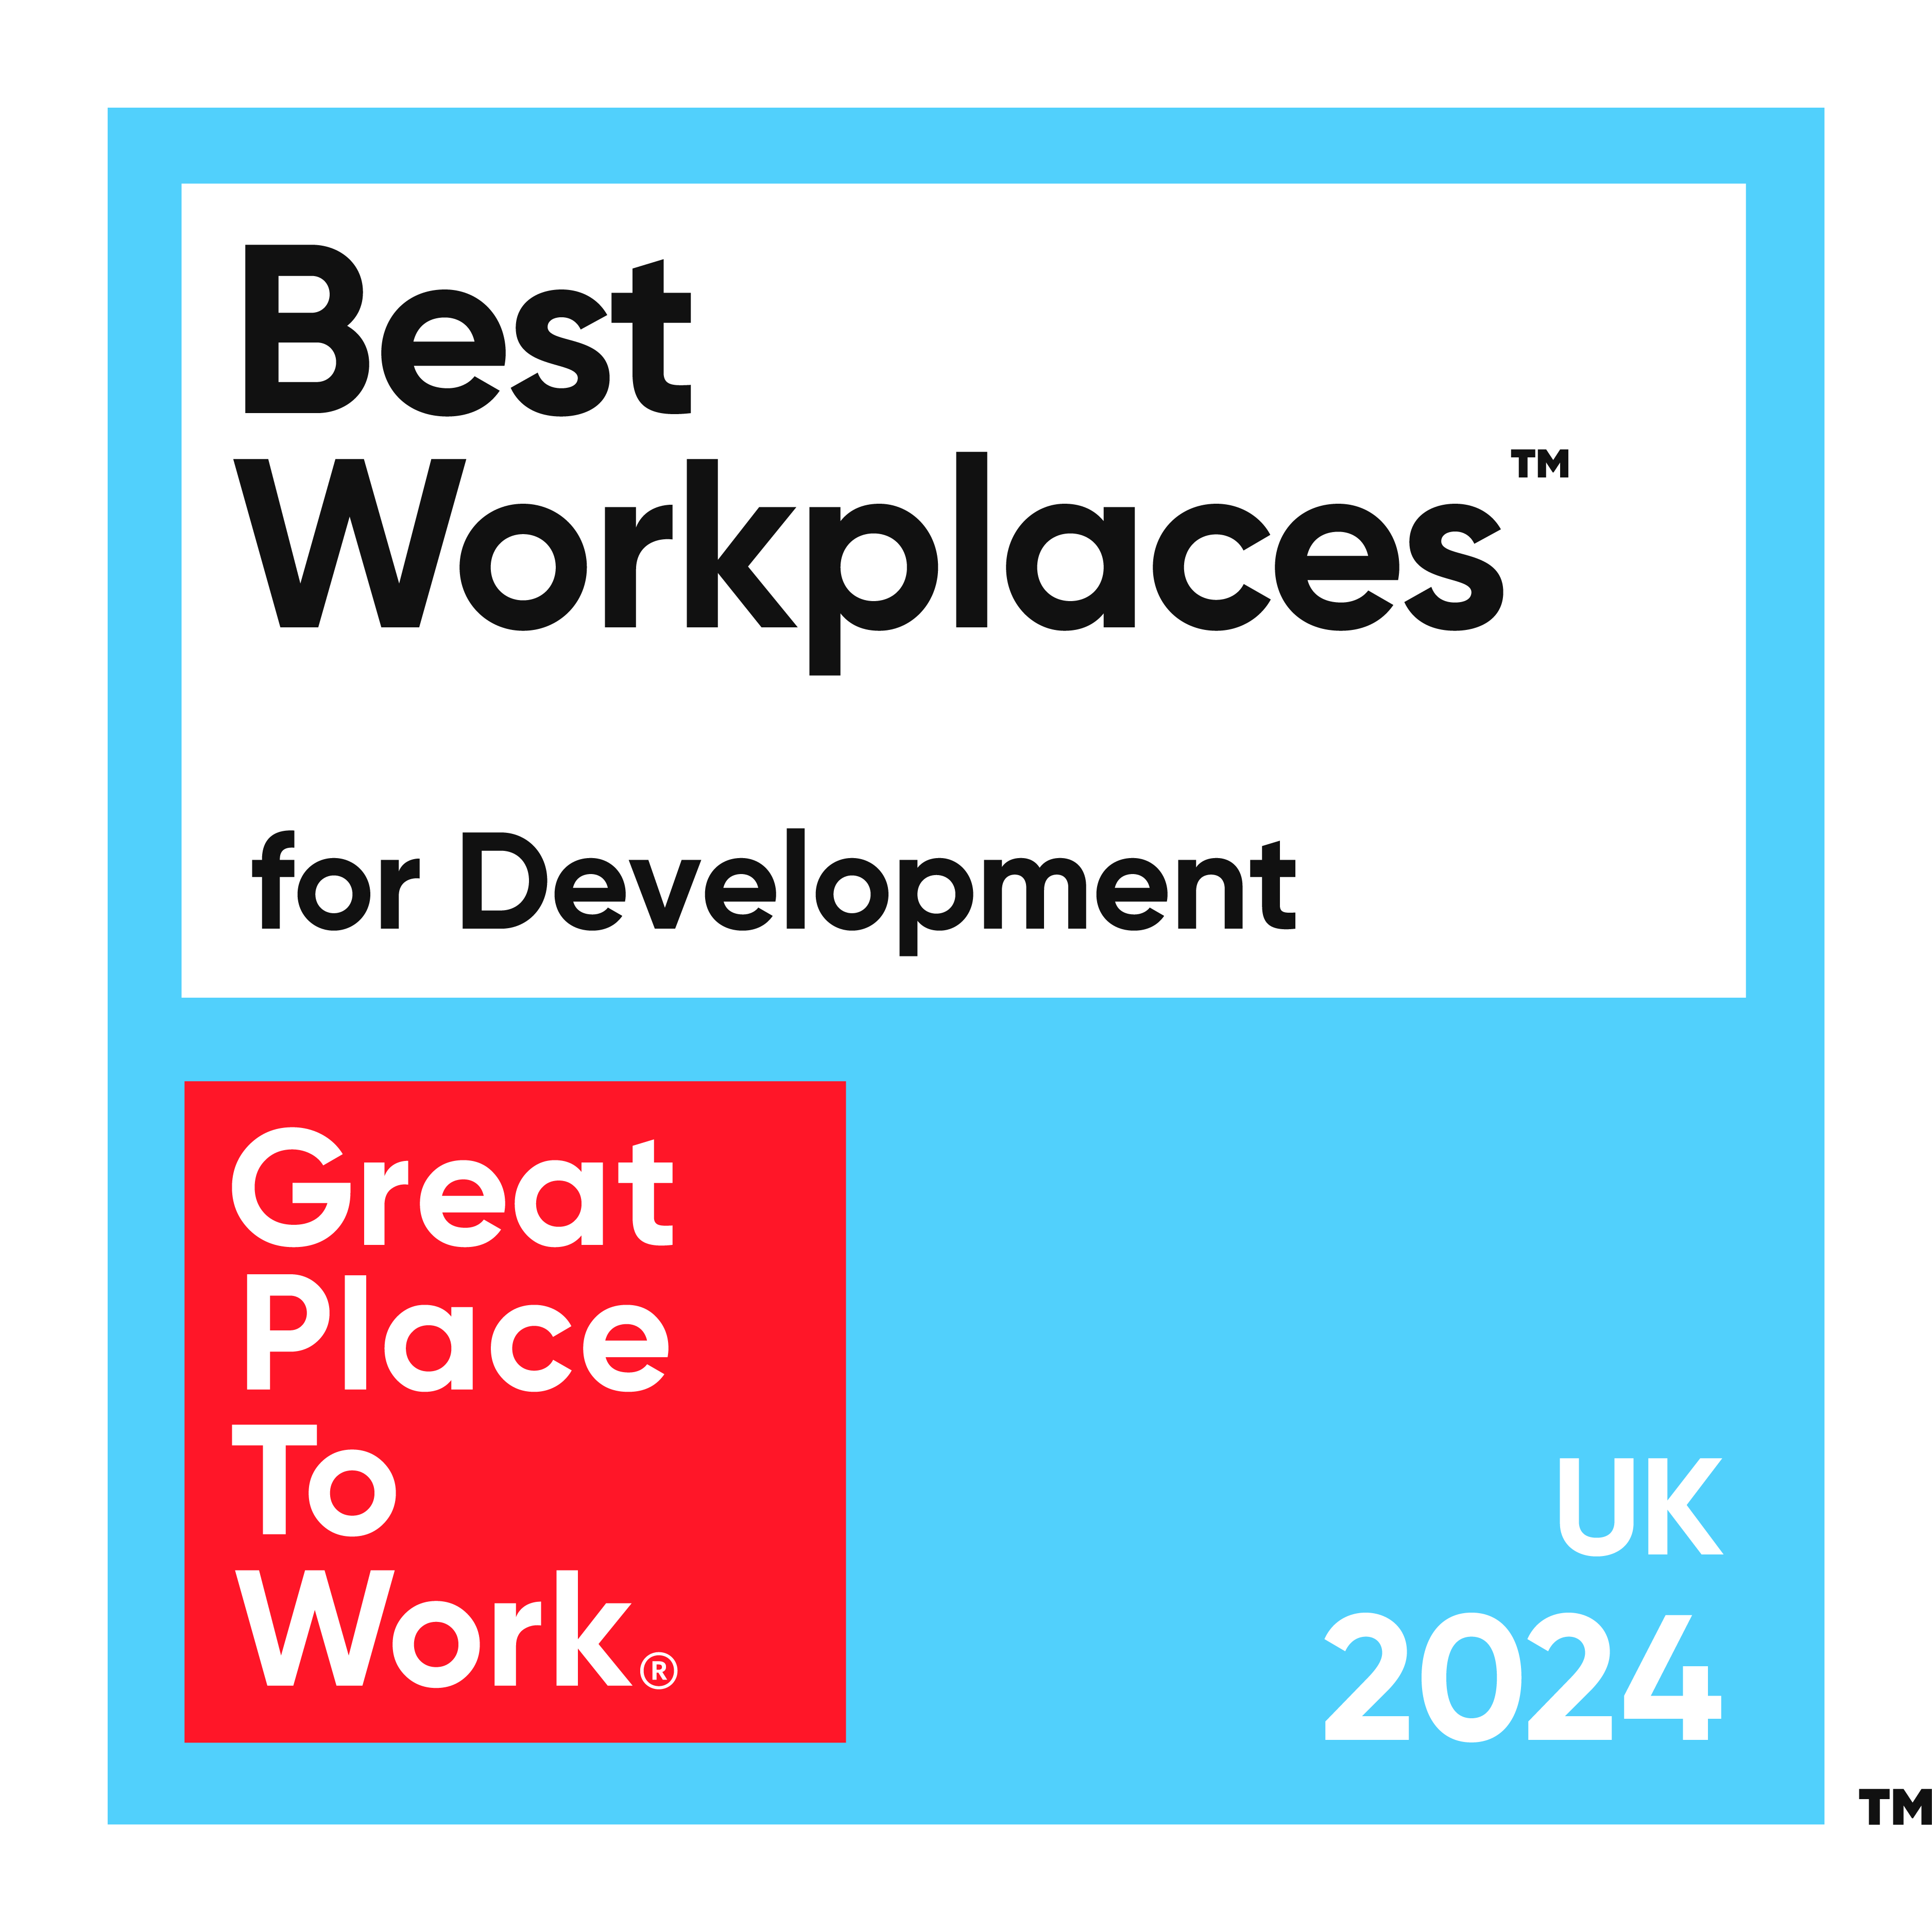 KnowBe4 Recognised in the UK's Best Workplaces for Development™ 2024 List